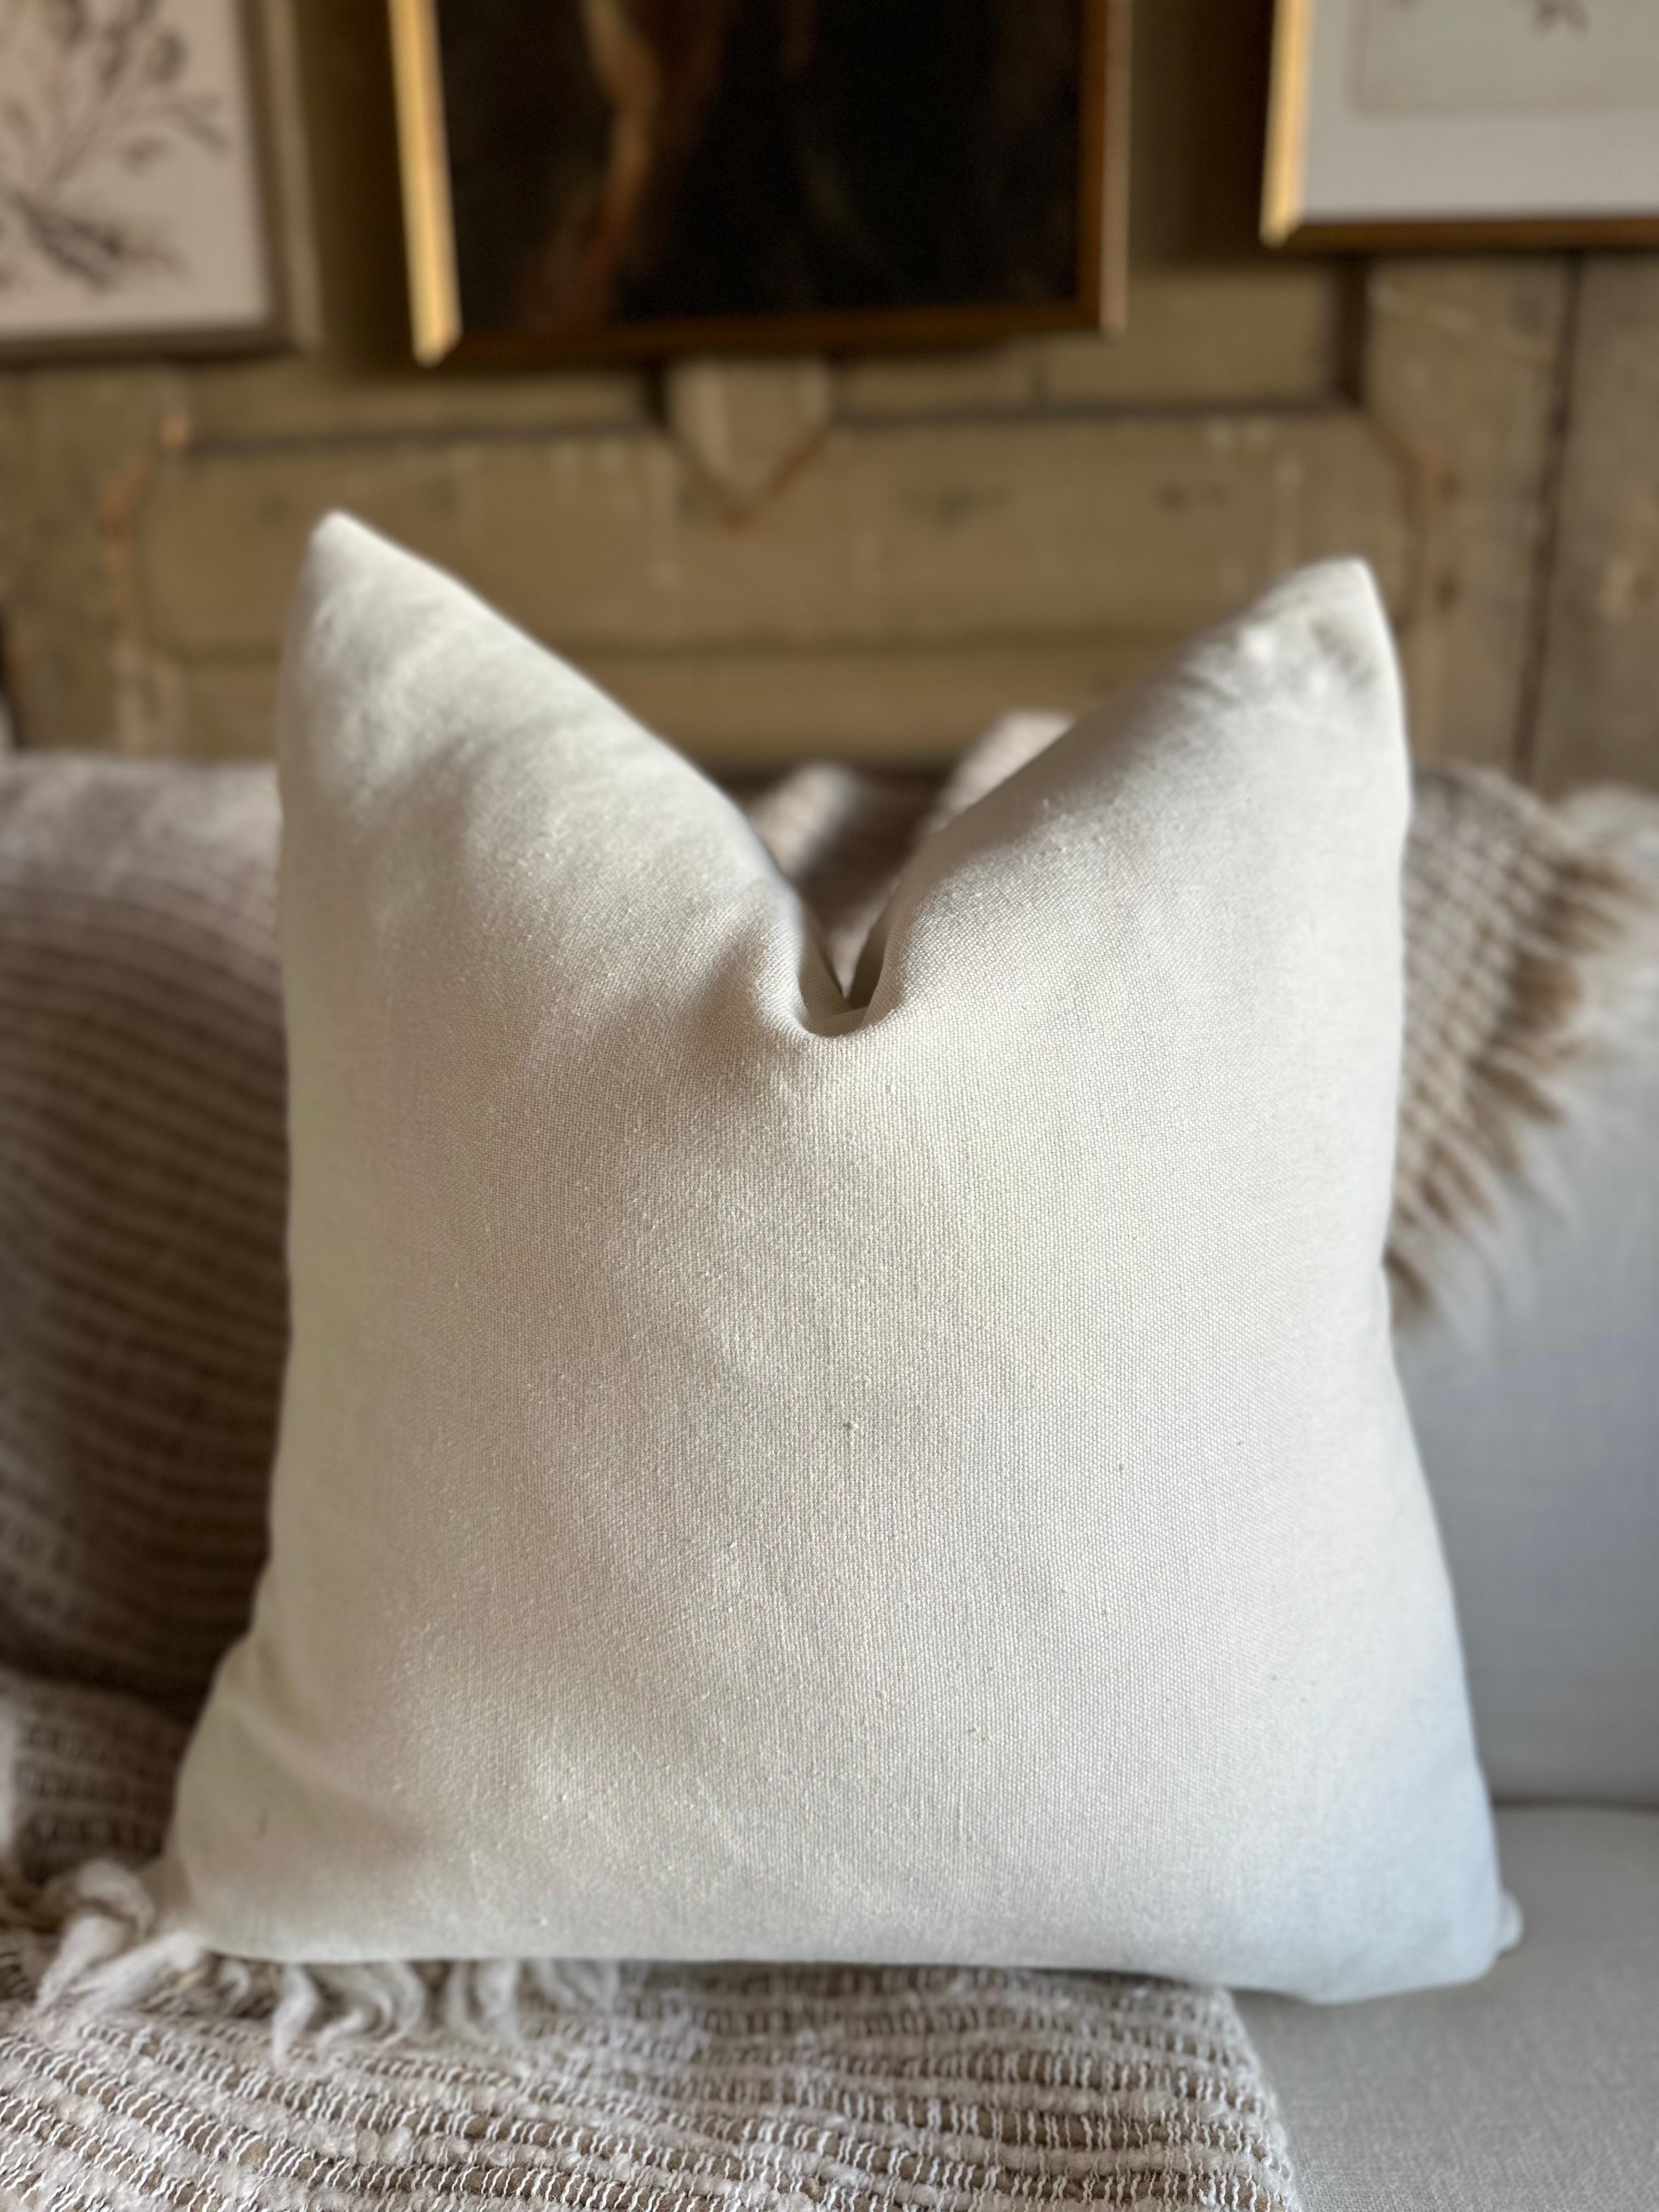 A luxurious heavy woven linen face with stone washed linen back.
Linen fabric is imported from France.
Custom made to order, can be customized to your size.
Color: Blanc / Oyster
Antique brass zipper
Size 22x22
Includes Down Feather Insert
Care: Can